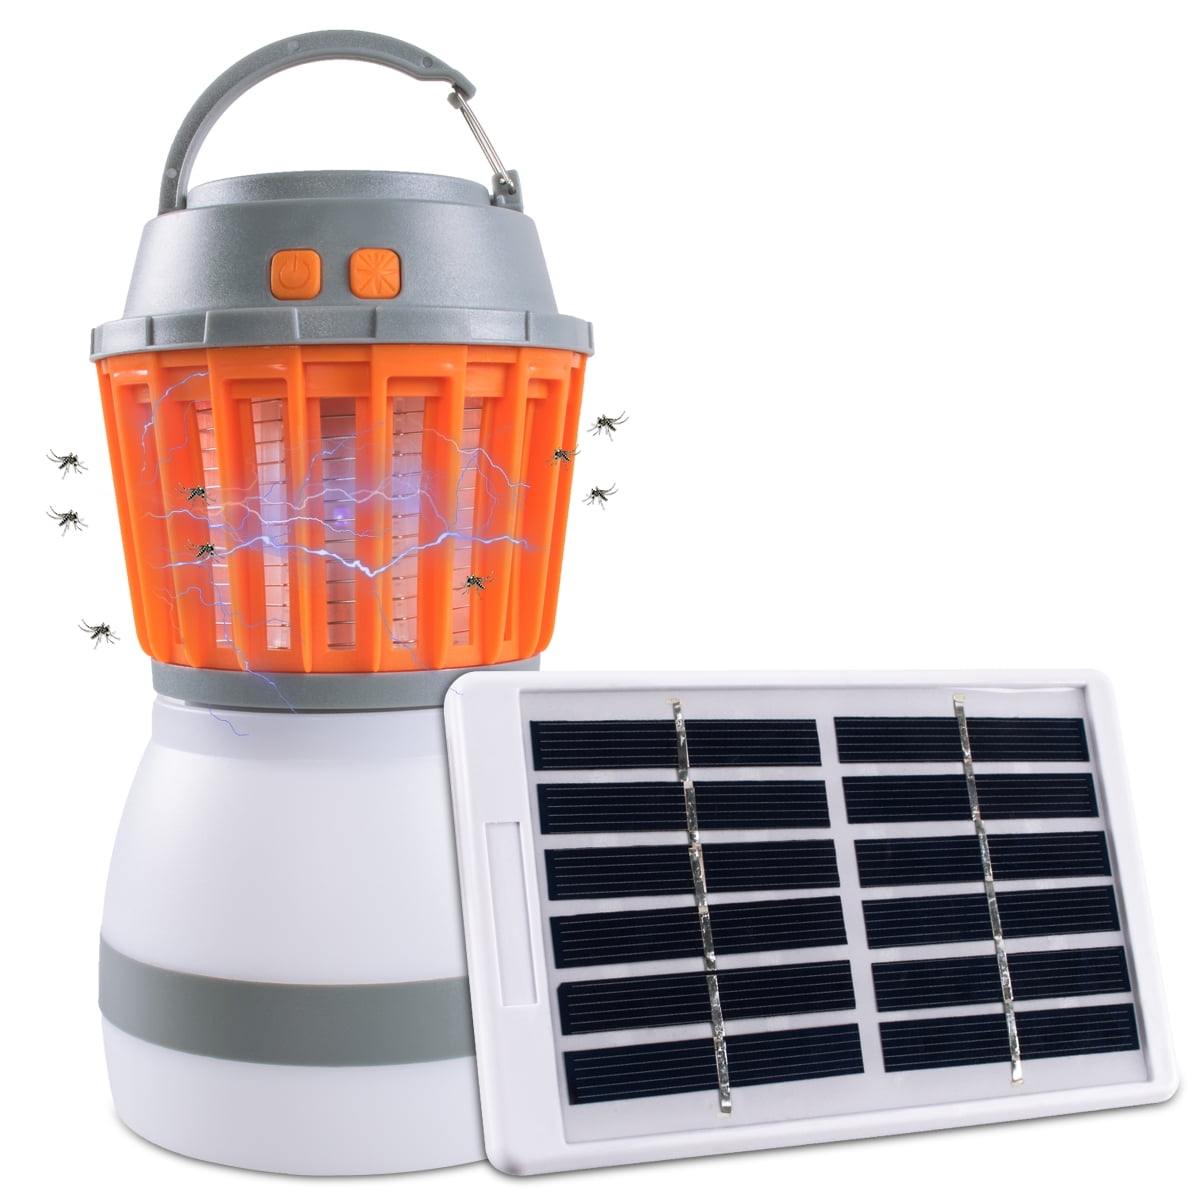 BACKTURE Camping Lamp Camping Fishing Hiking Emergency 2-in-1 Portable Mosquito Killer LED Bug Zapper IPX65 Waterproof Outdoor Camping Lantern USB Rechargeable 3 Lighting Modes for Home